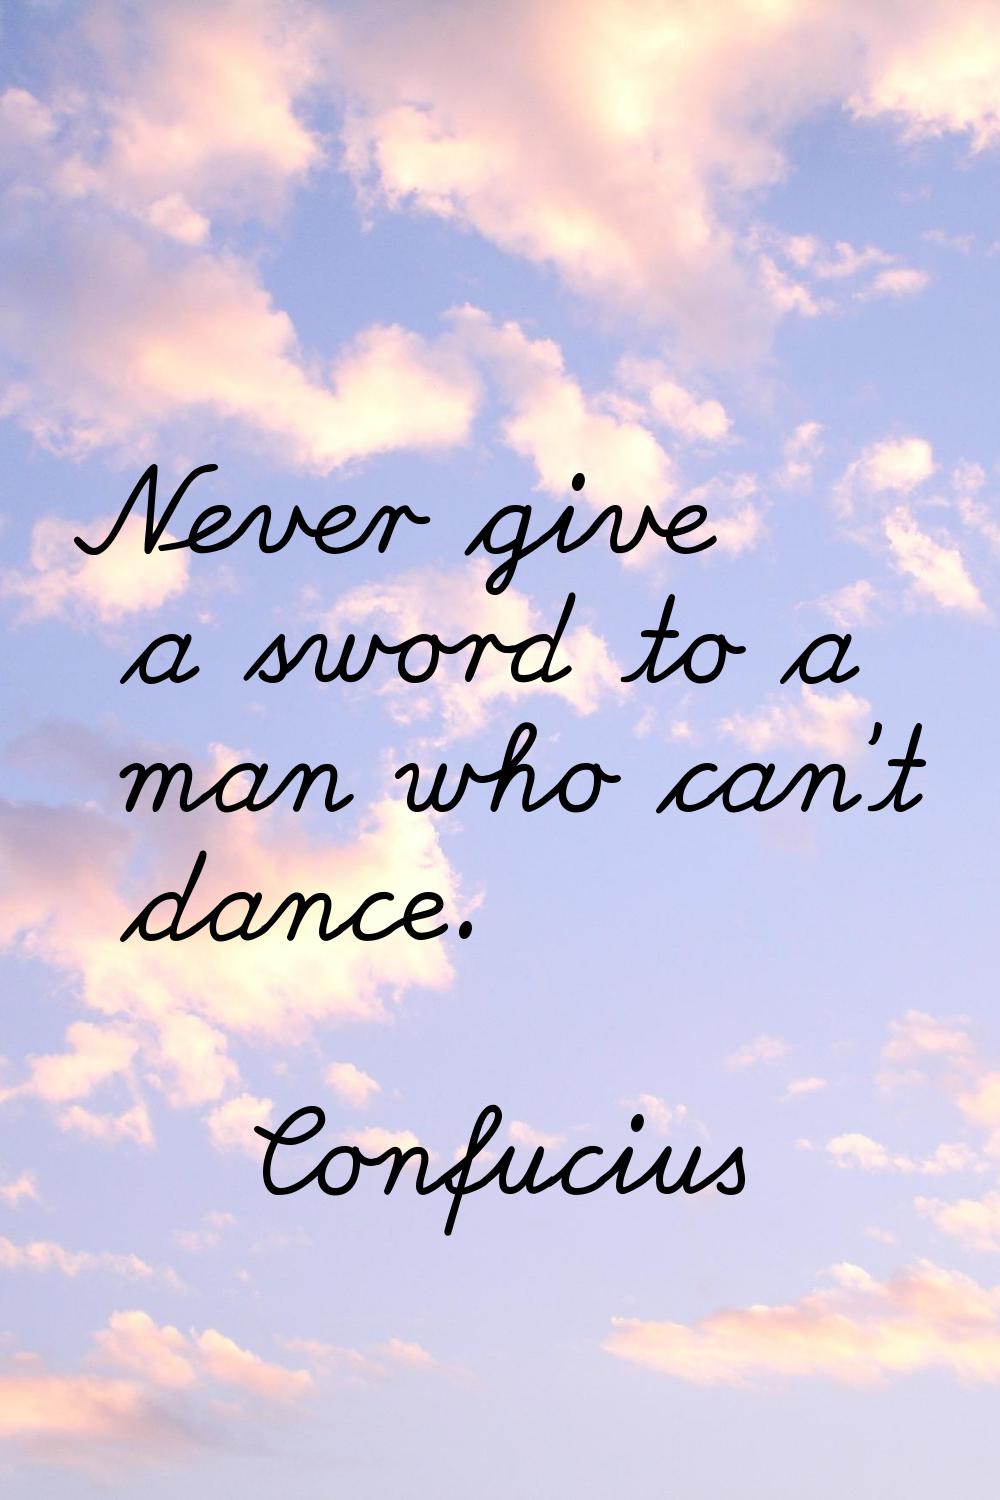 Never give a sword to a man who can't dance.